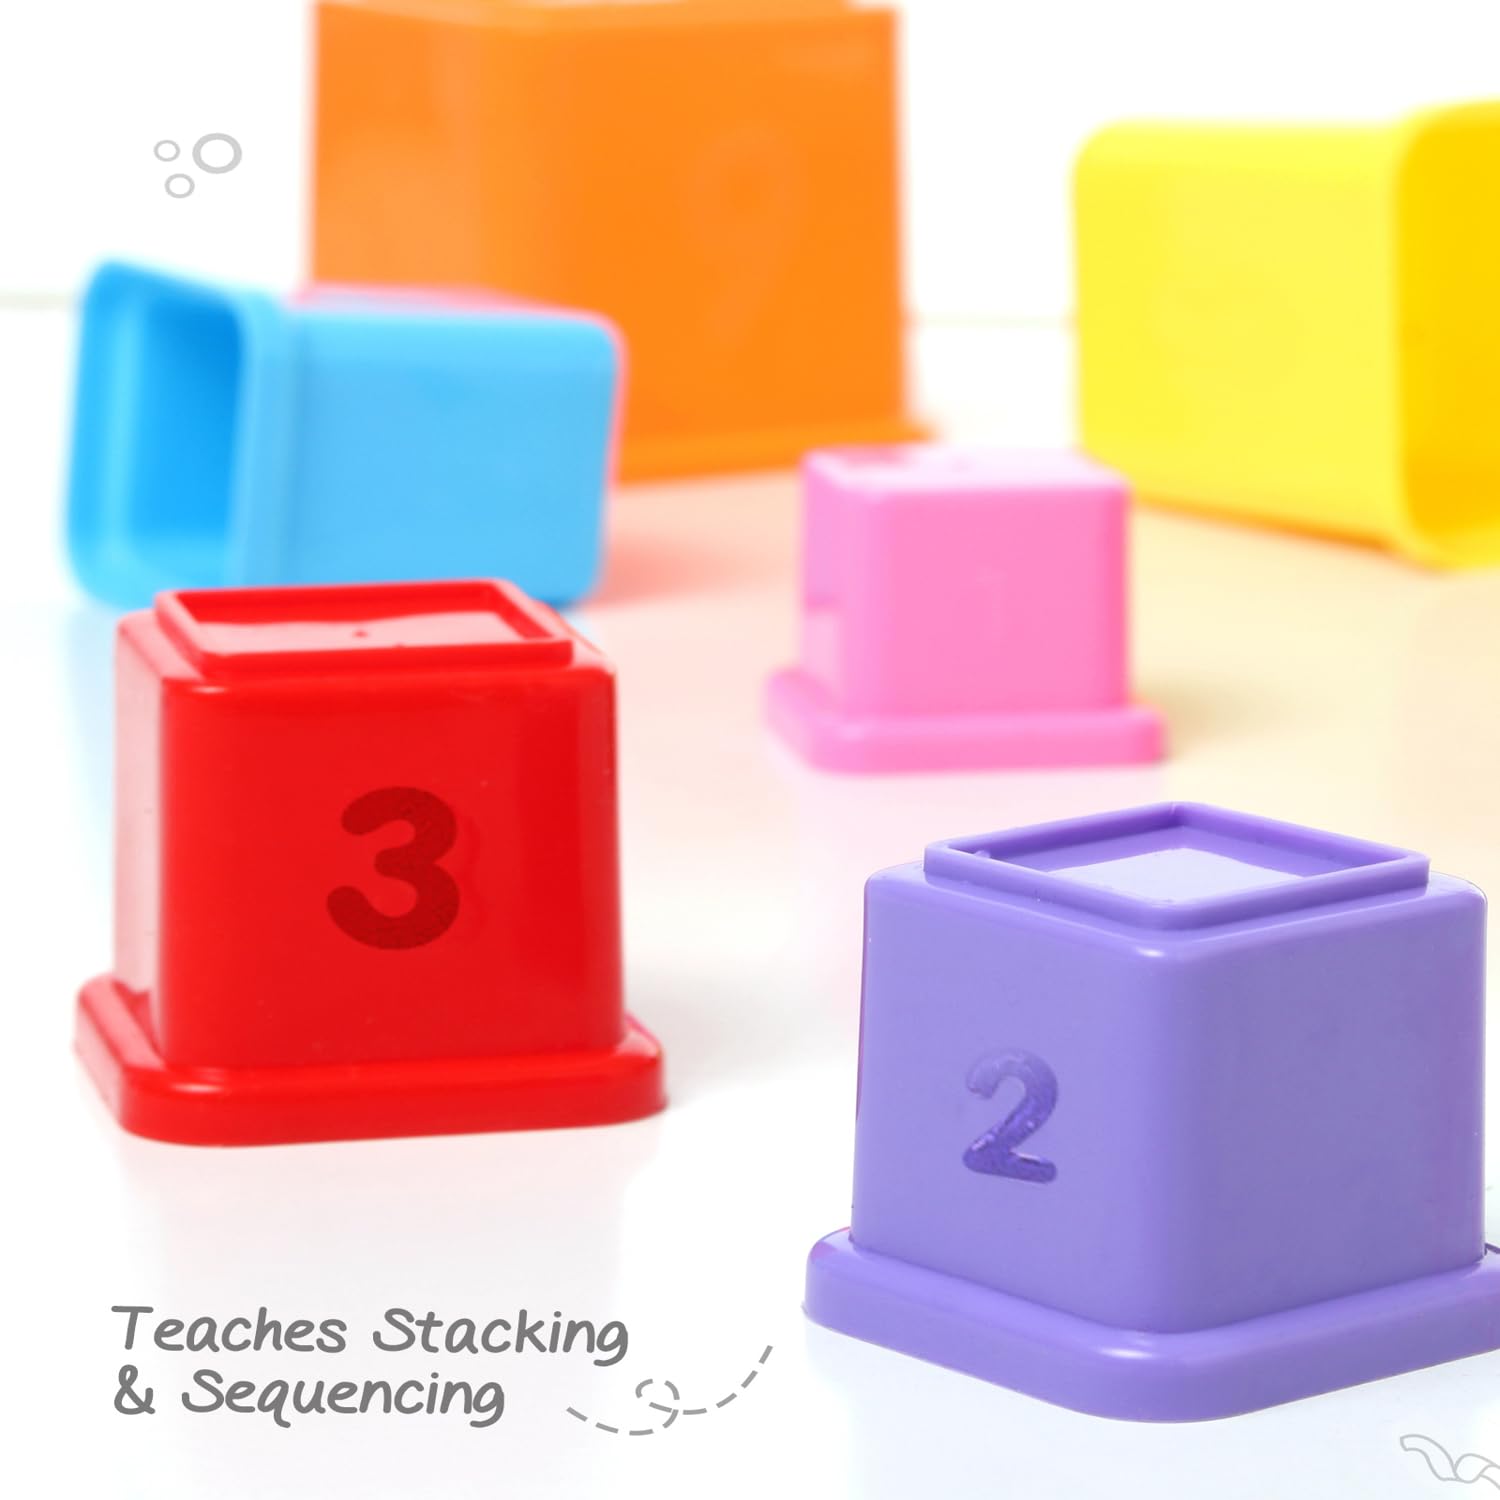 FIRSTCRY INTELLISKILLS Premium Stacking & Sequencing Cubes Toy|Activity & Learning Toy For Babies|Nesting Toy For Infants & Preschoolers I Multicolor - 10 Pieces